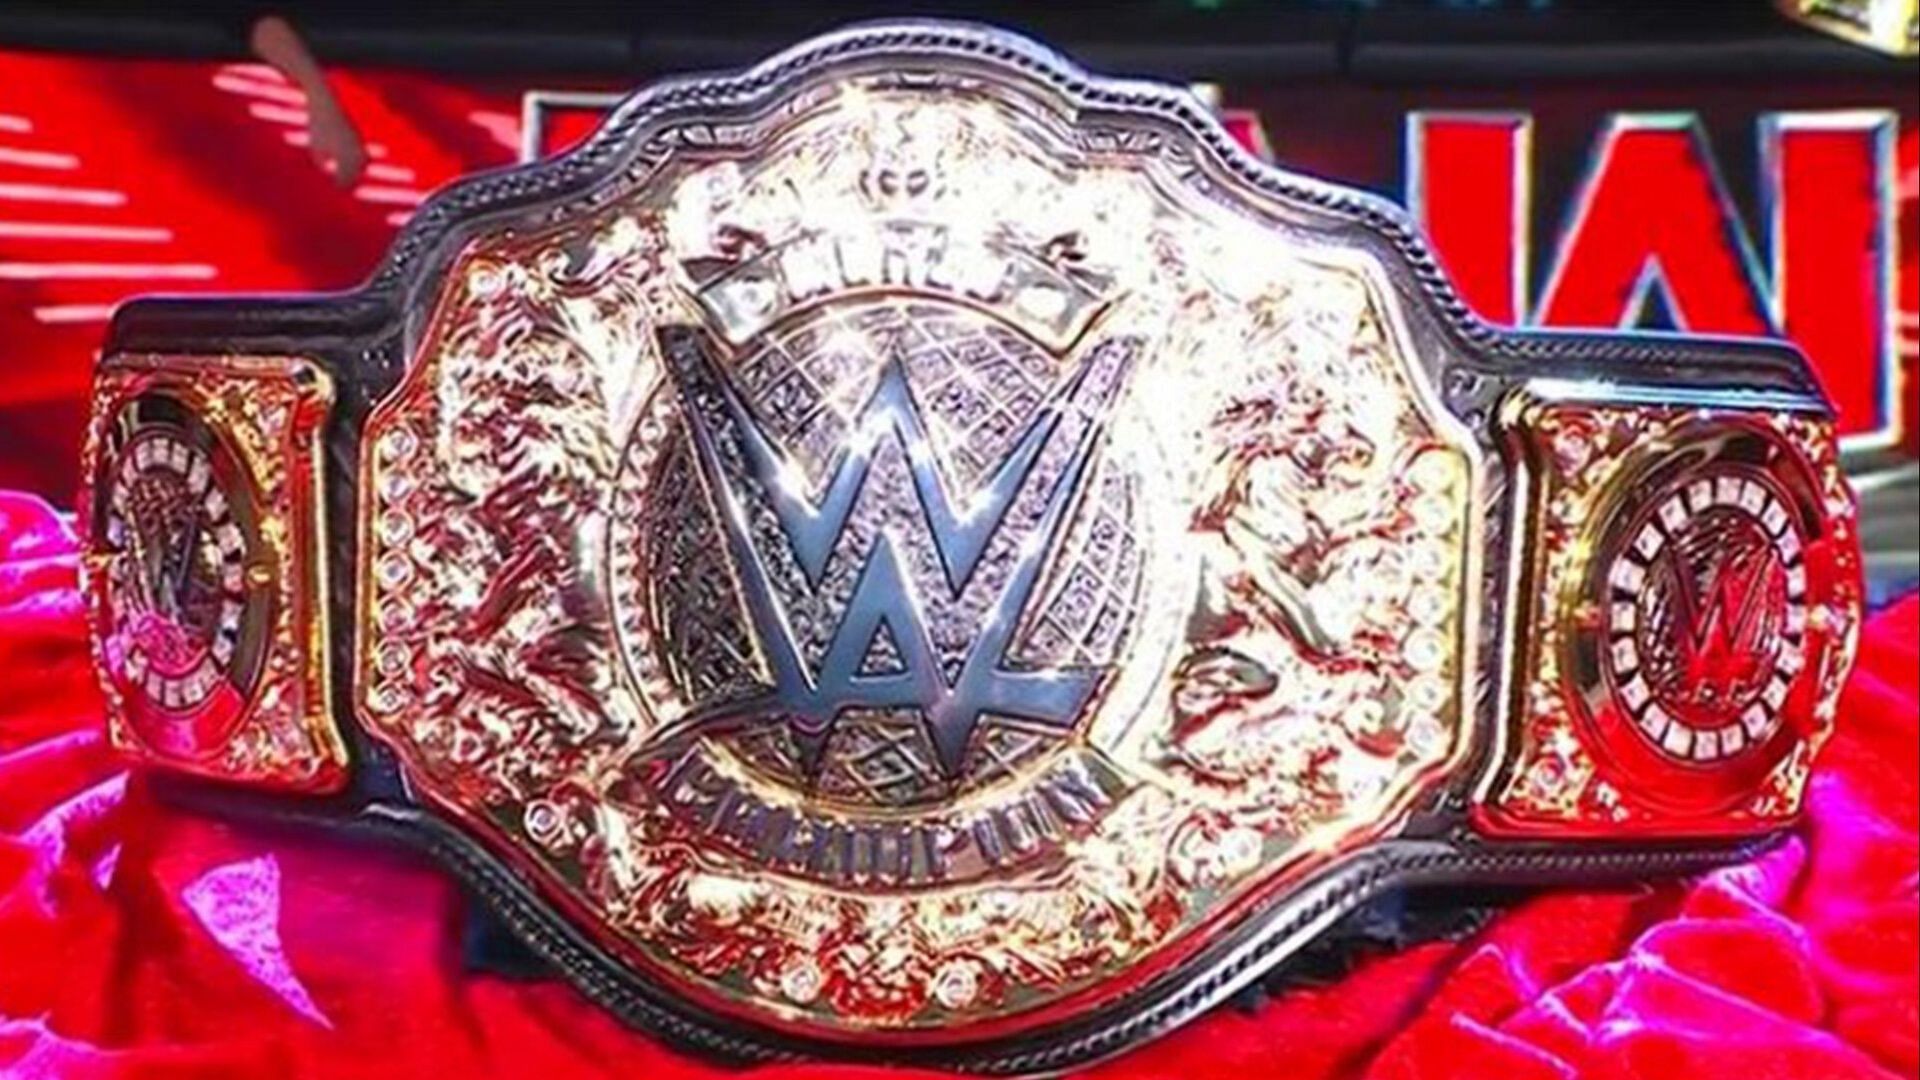 A new World Heavyweight Champion will be determined at Night of Champions 2023.